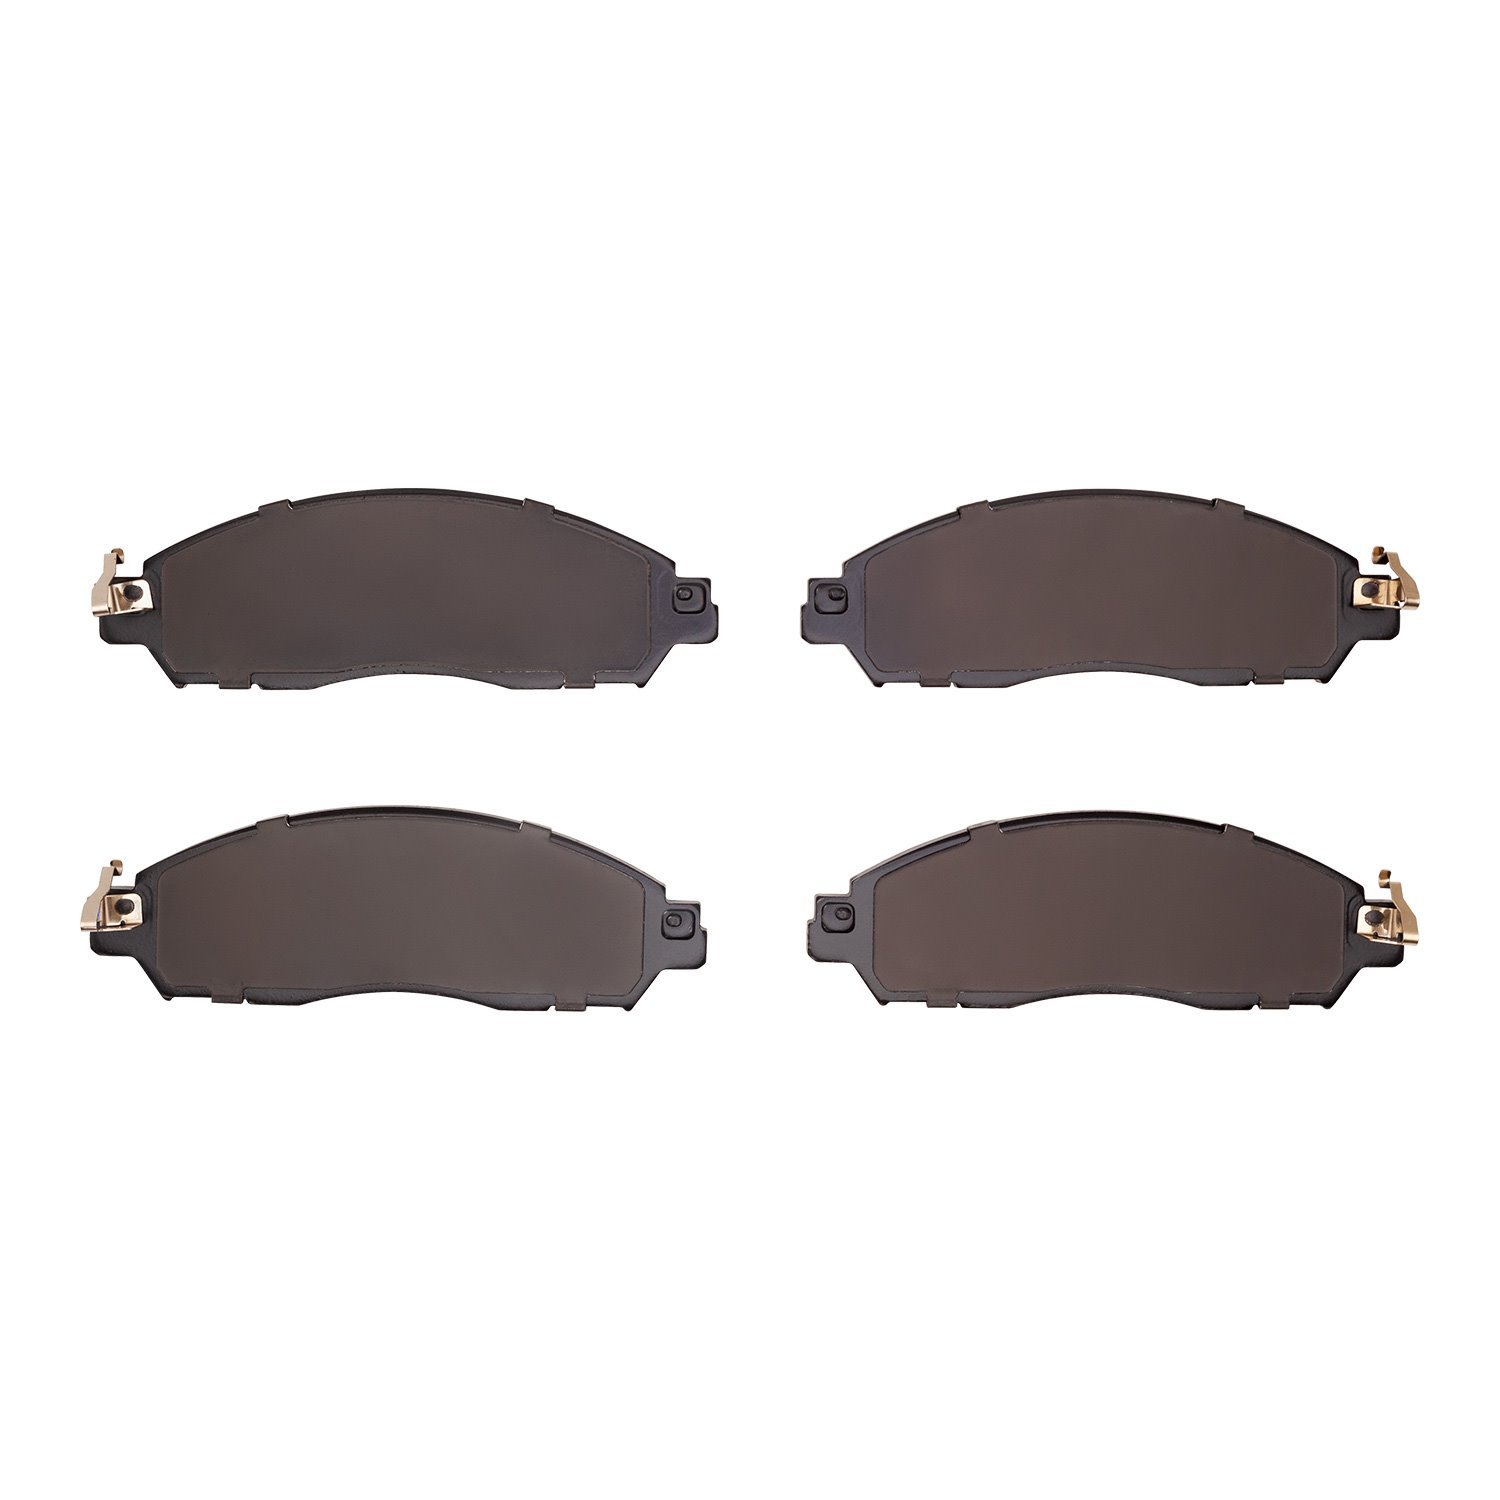 1310-2138-00 3000-Series Ceramic Brake Pads, Fits Select Infiniti/Nissan, Position: Front